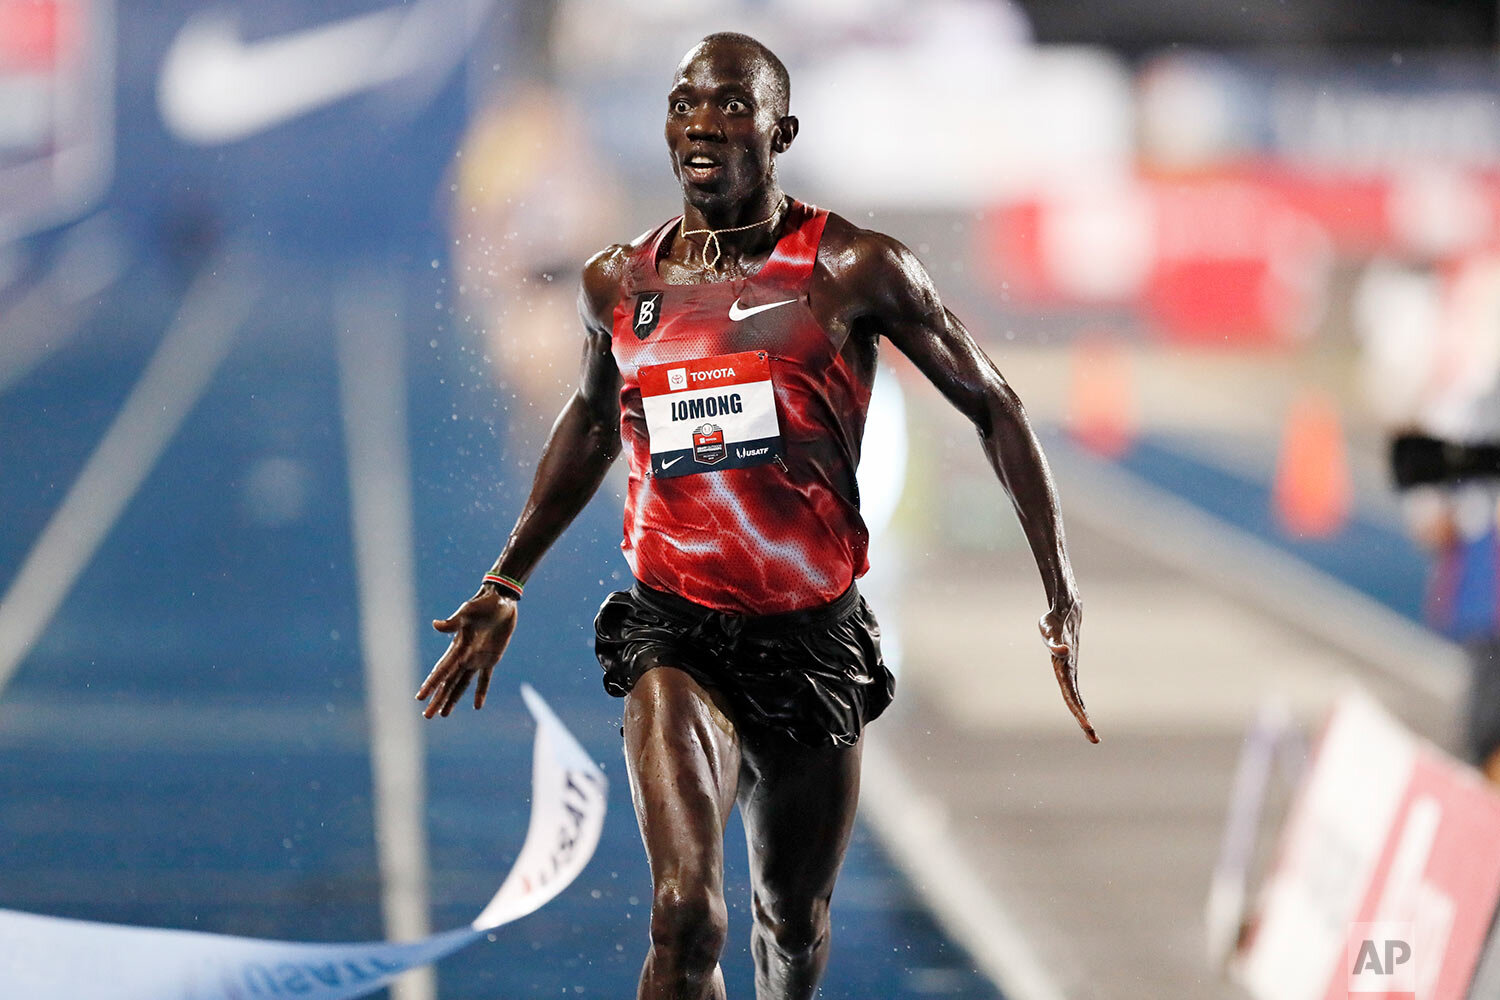  Lopez Lomong wins the men's 10,000-meter run at the U.S. Track & Field Outdoor Championships in Des Moines, Iowa, on July 25, 2019. (AP Photo/Charlie Neibergall) 